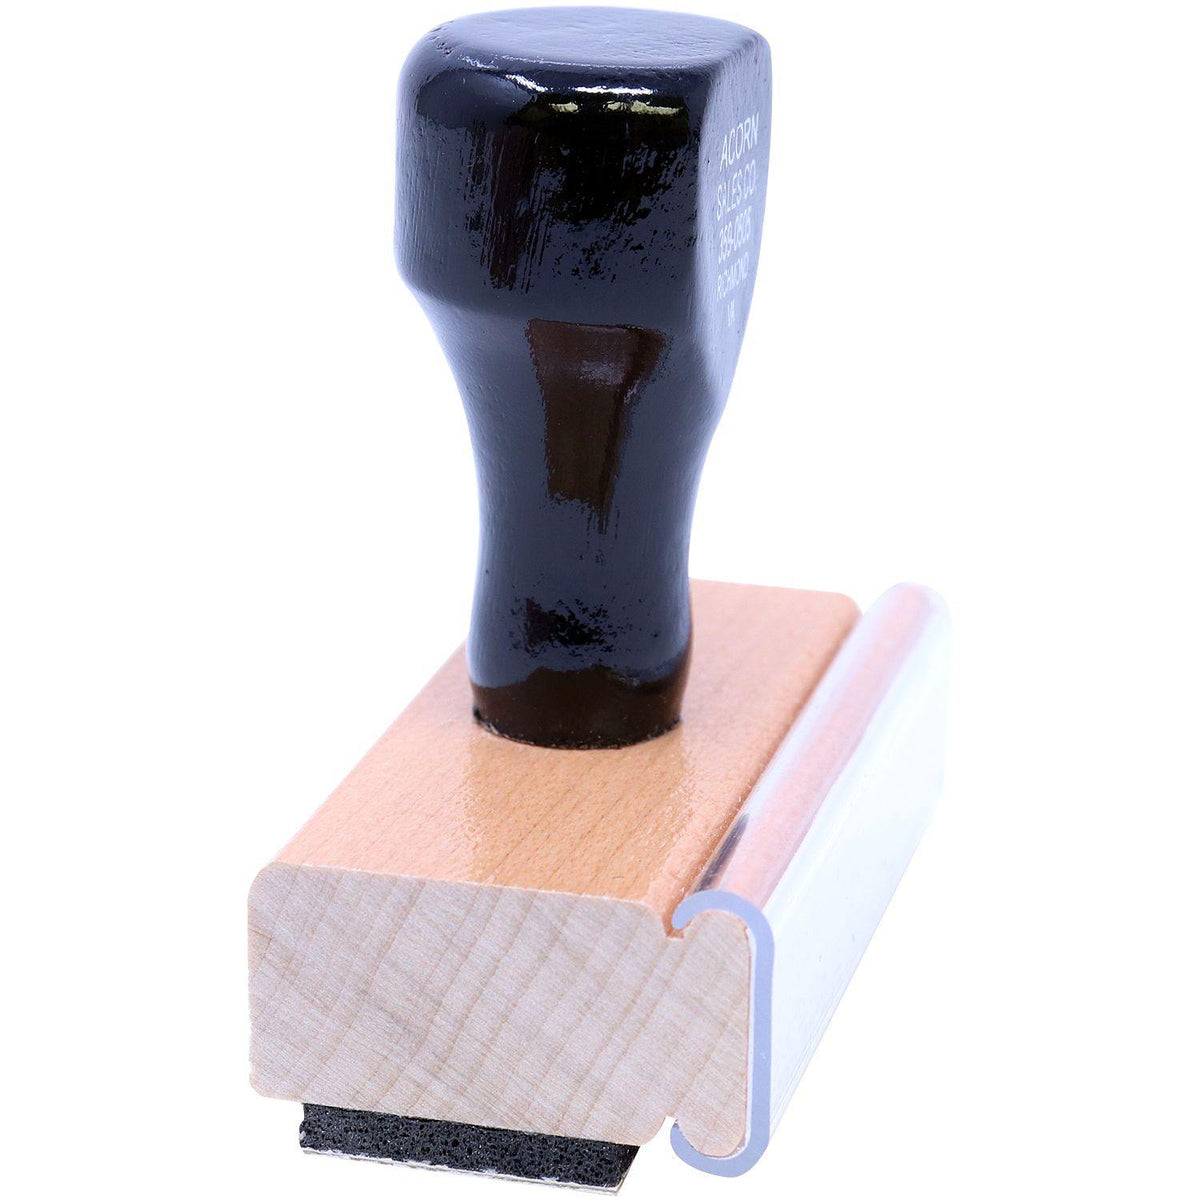 Side View of Large Original Rubber Stamp at an Angle